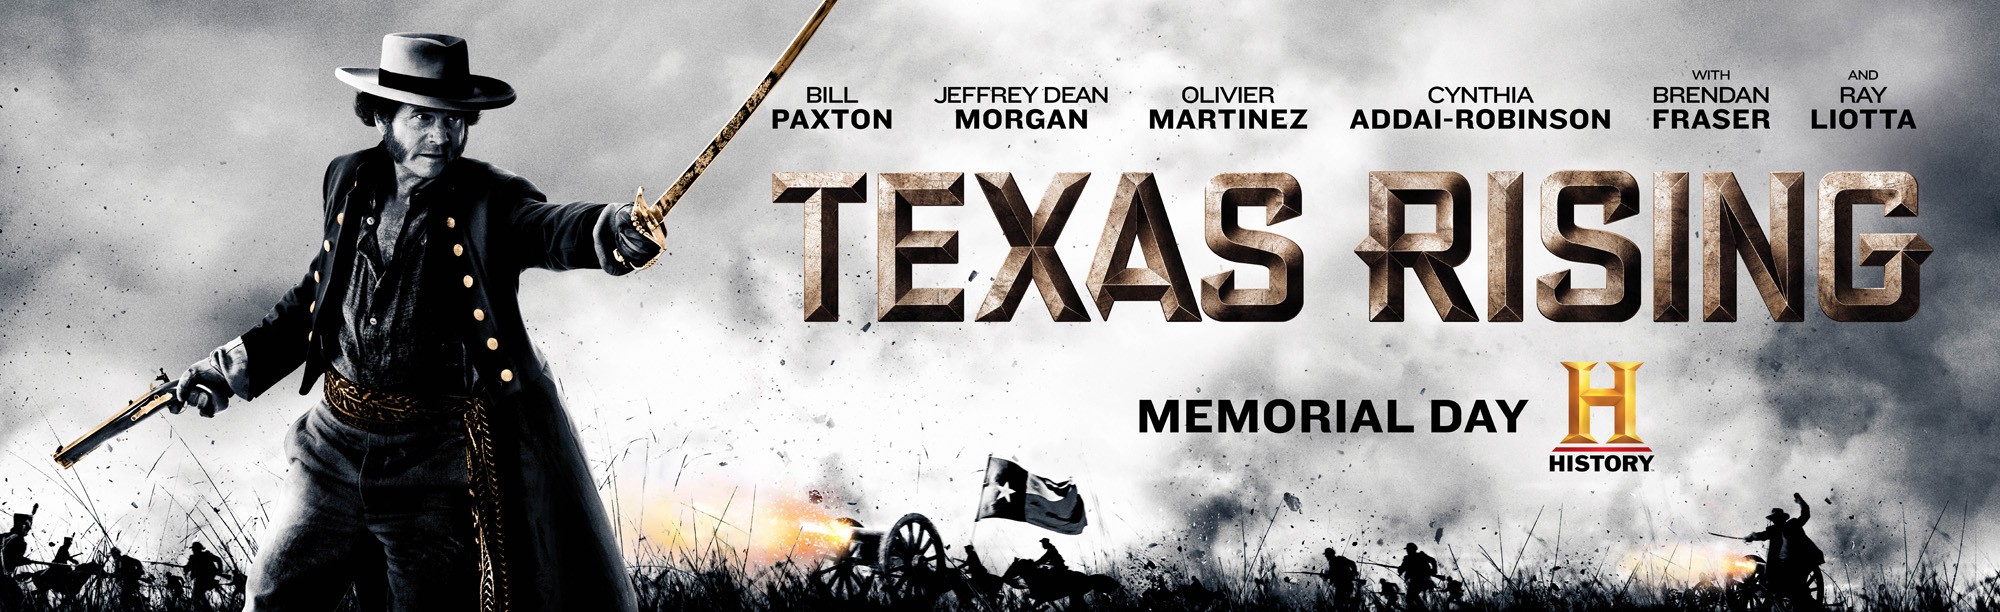 Mega Sized TV Poster Image for Texas Rising (#12 of 17)